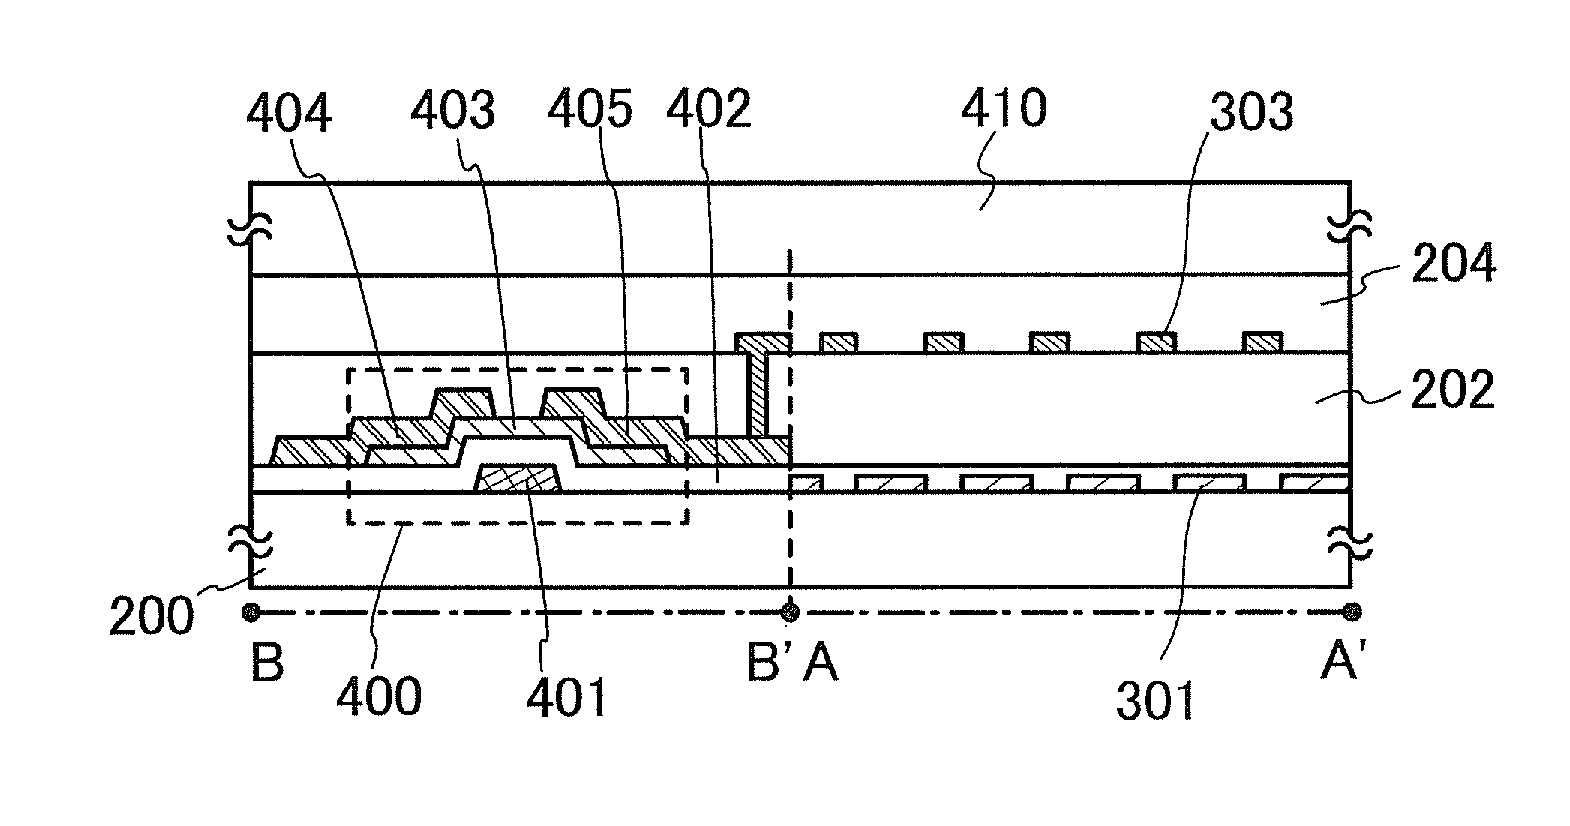 Display device comprising an oxide semiconductor layer